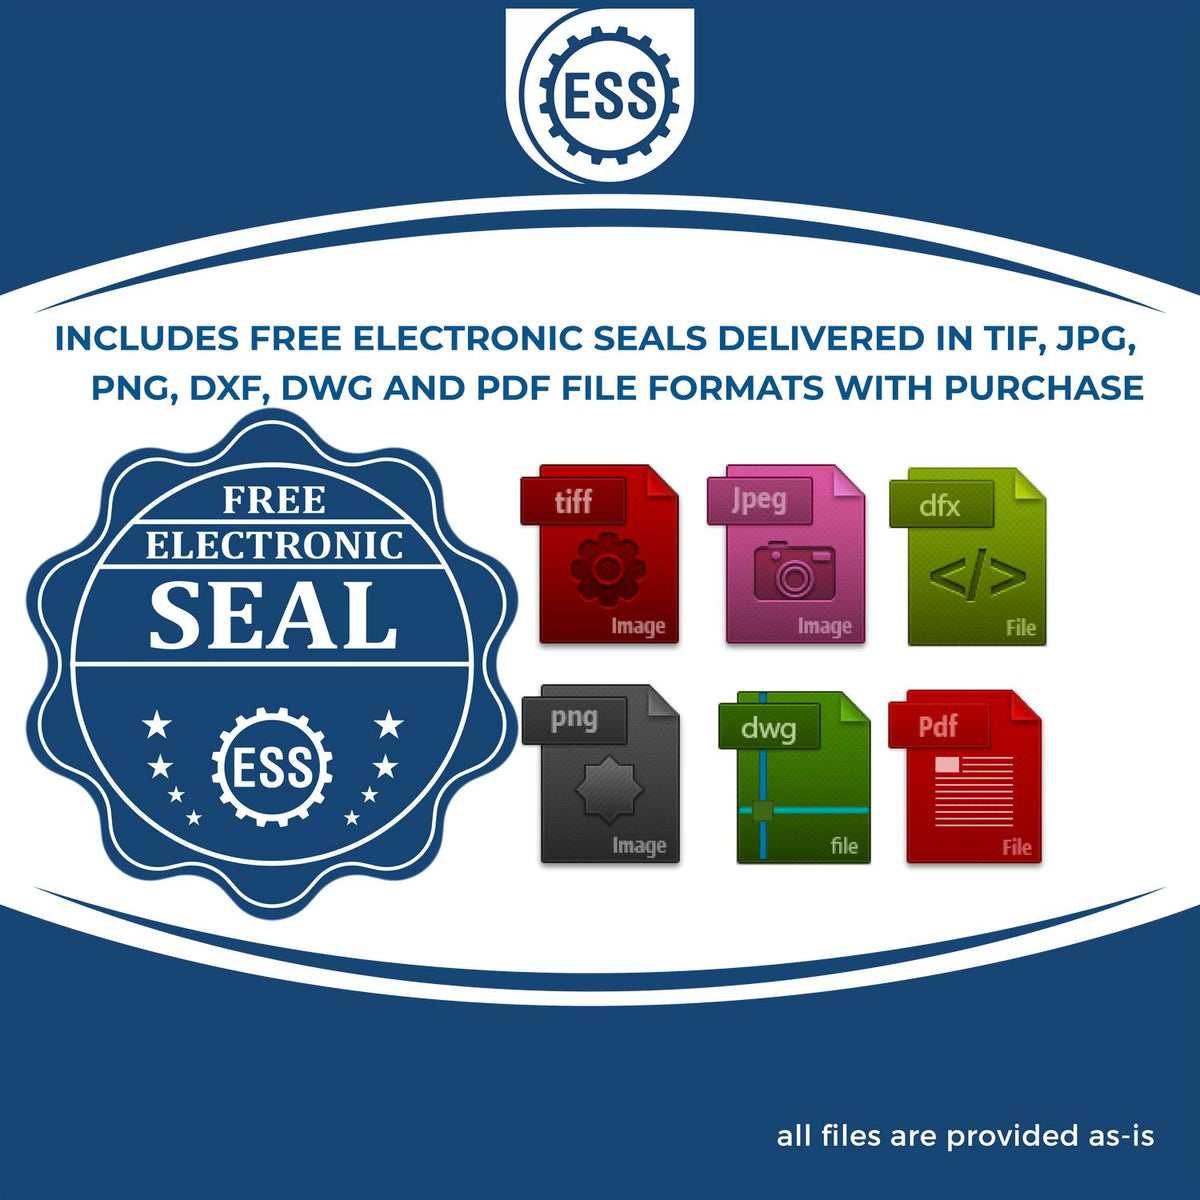 An infographic for the free electronic seal for the Heavy Duty Cast Iron Arkansas Engineer Seal Embosser illustrating the different file type icons such as DXF, DWG, TIF, JPG and PNG.